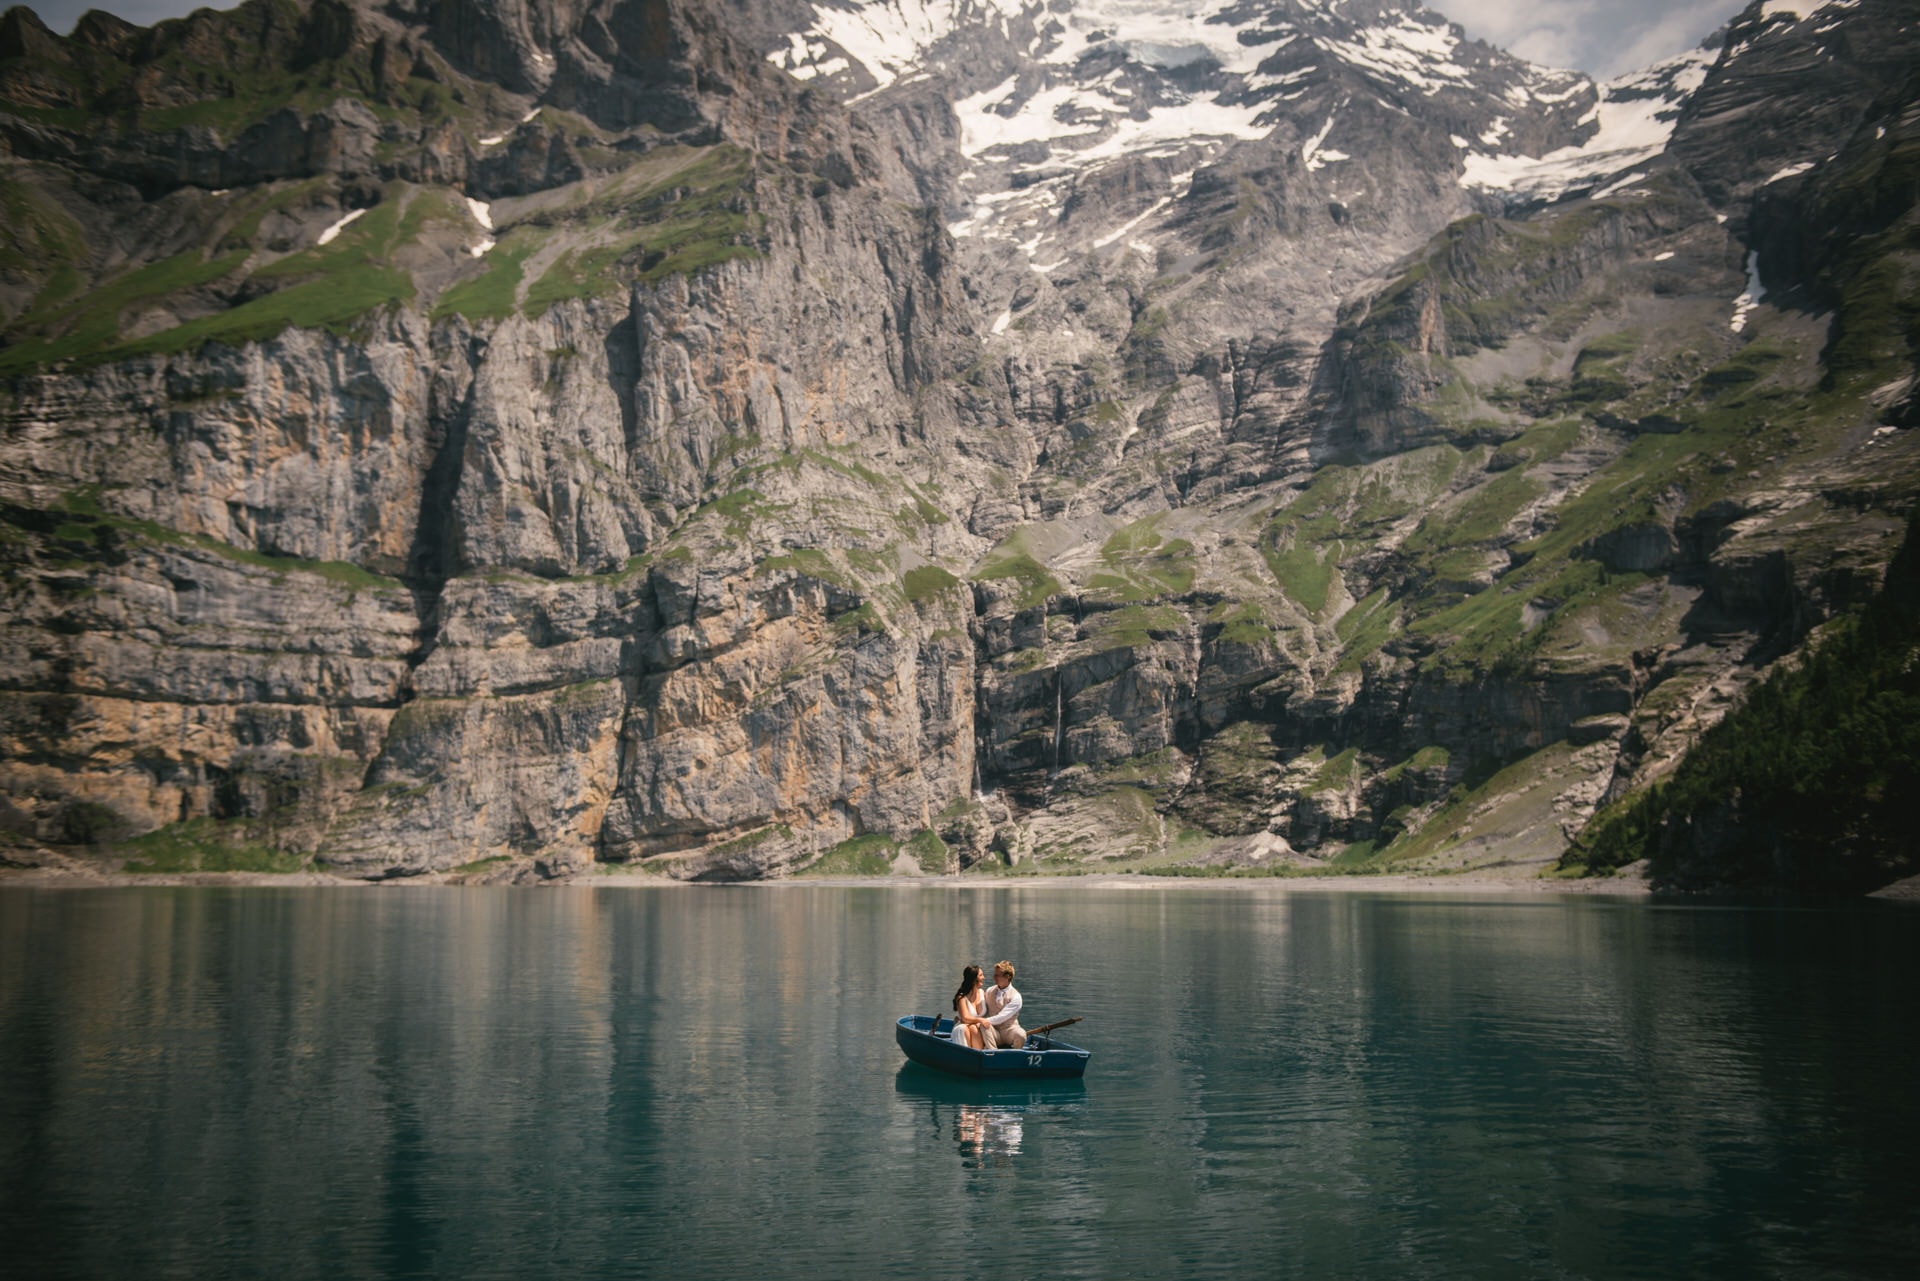 Nature's cathedral, their love's sanctuary - a captivating hiking elopement.